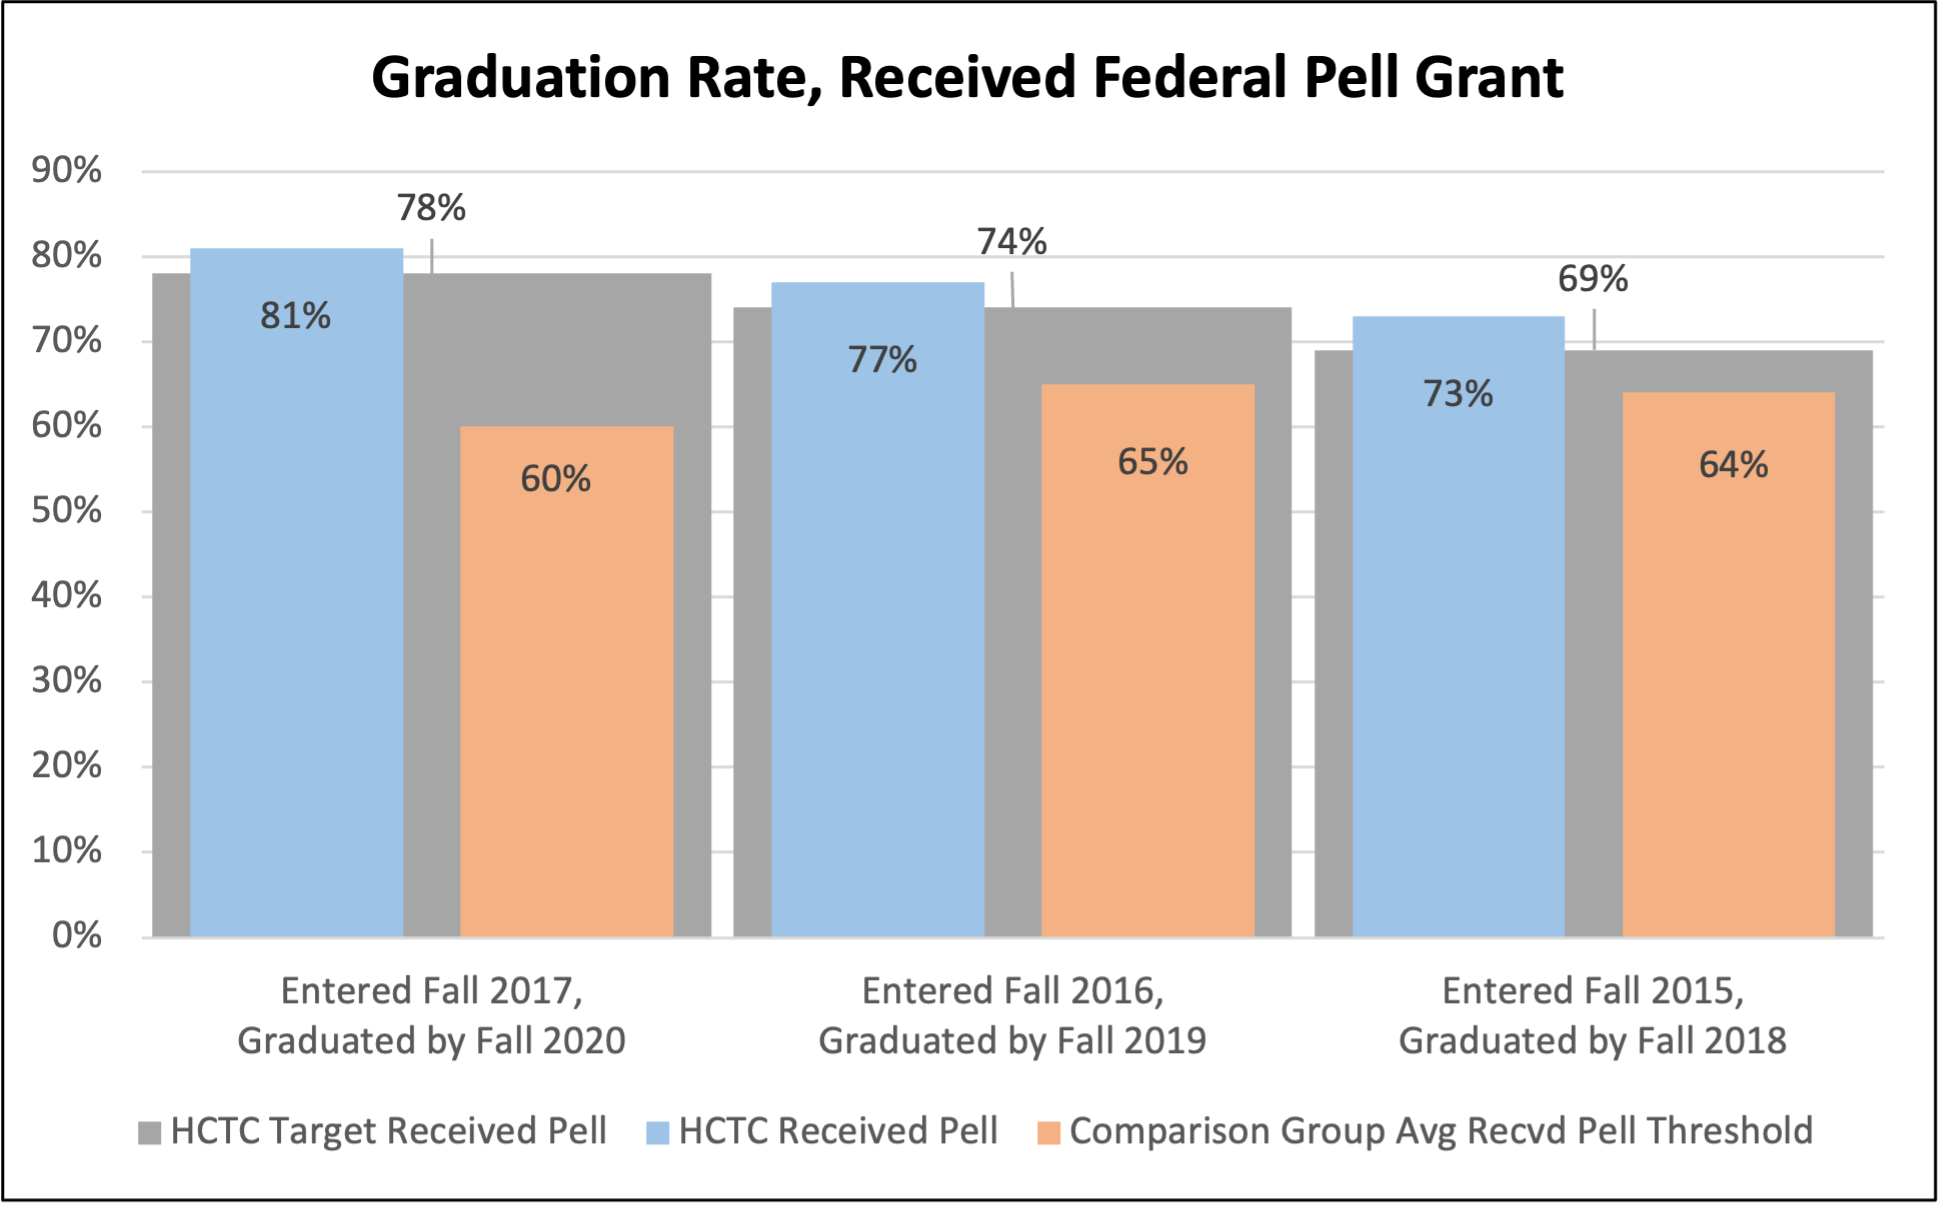 Graduation Rate Received Federal Pell Grant vs. Did Not Receive Federal Pell Grant: Measured by the percentage of students from the cohort who completed a degree or certificate within three years disaggregated by students who received a federal Pell grant vs. students who did not receive a federal Pell grant.  That cohort includes first-time, full-time, credential-seeking students from summer-fall.